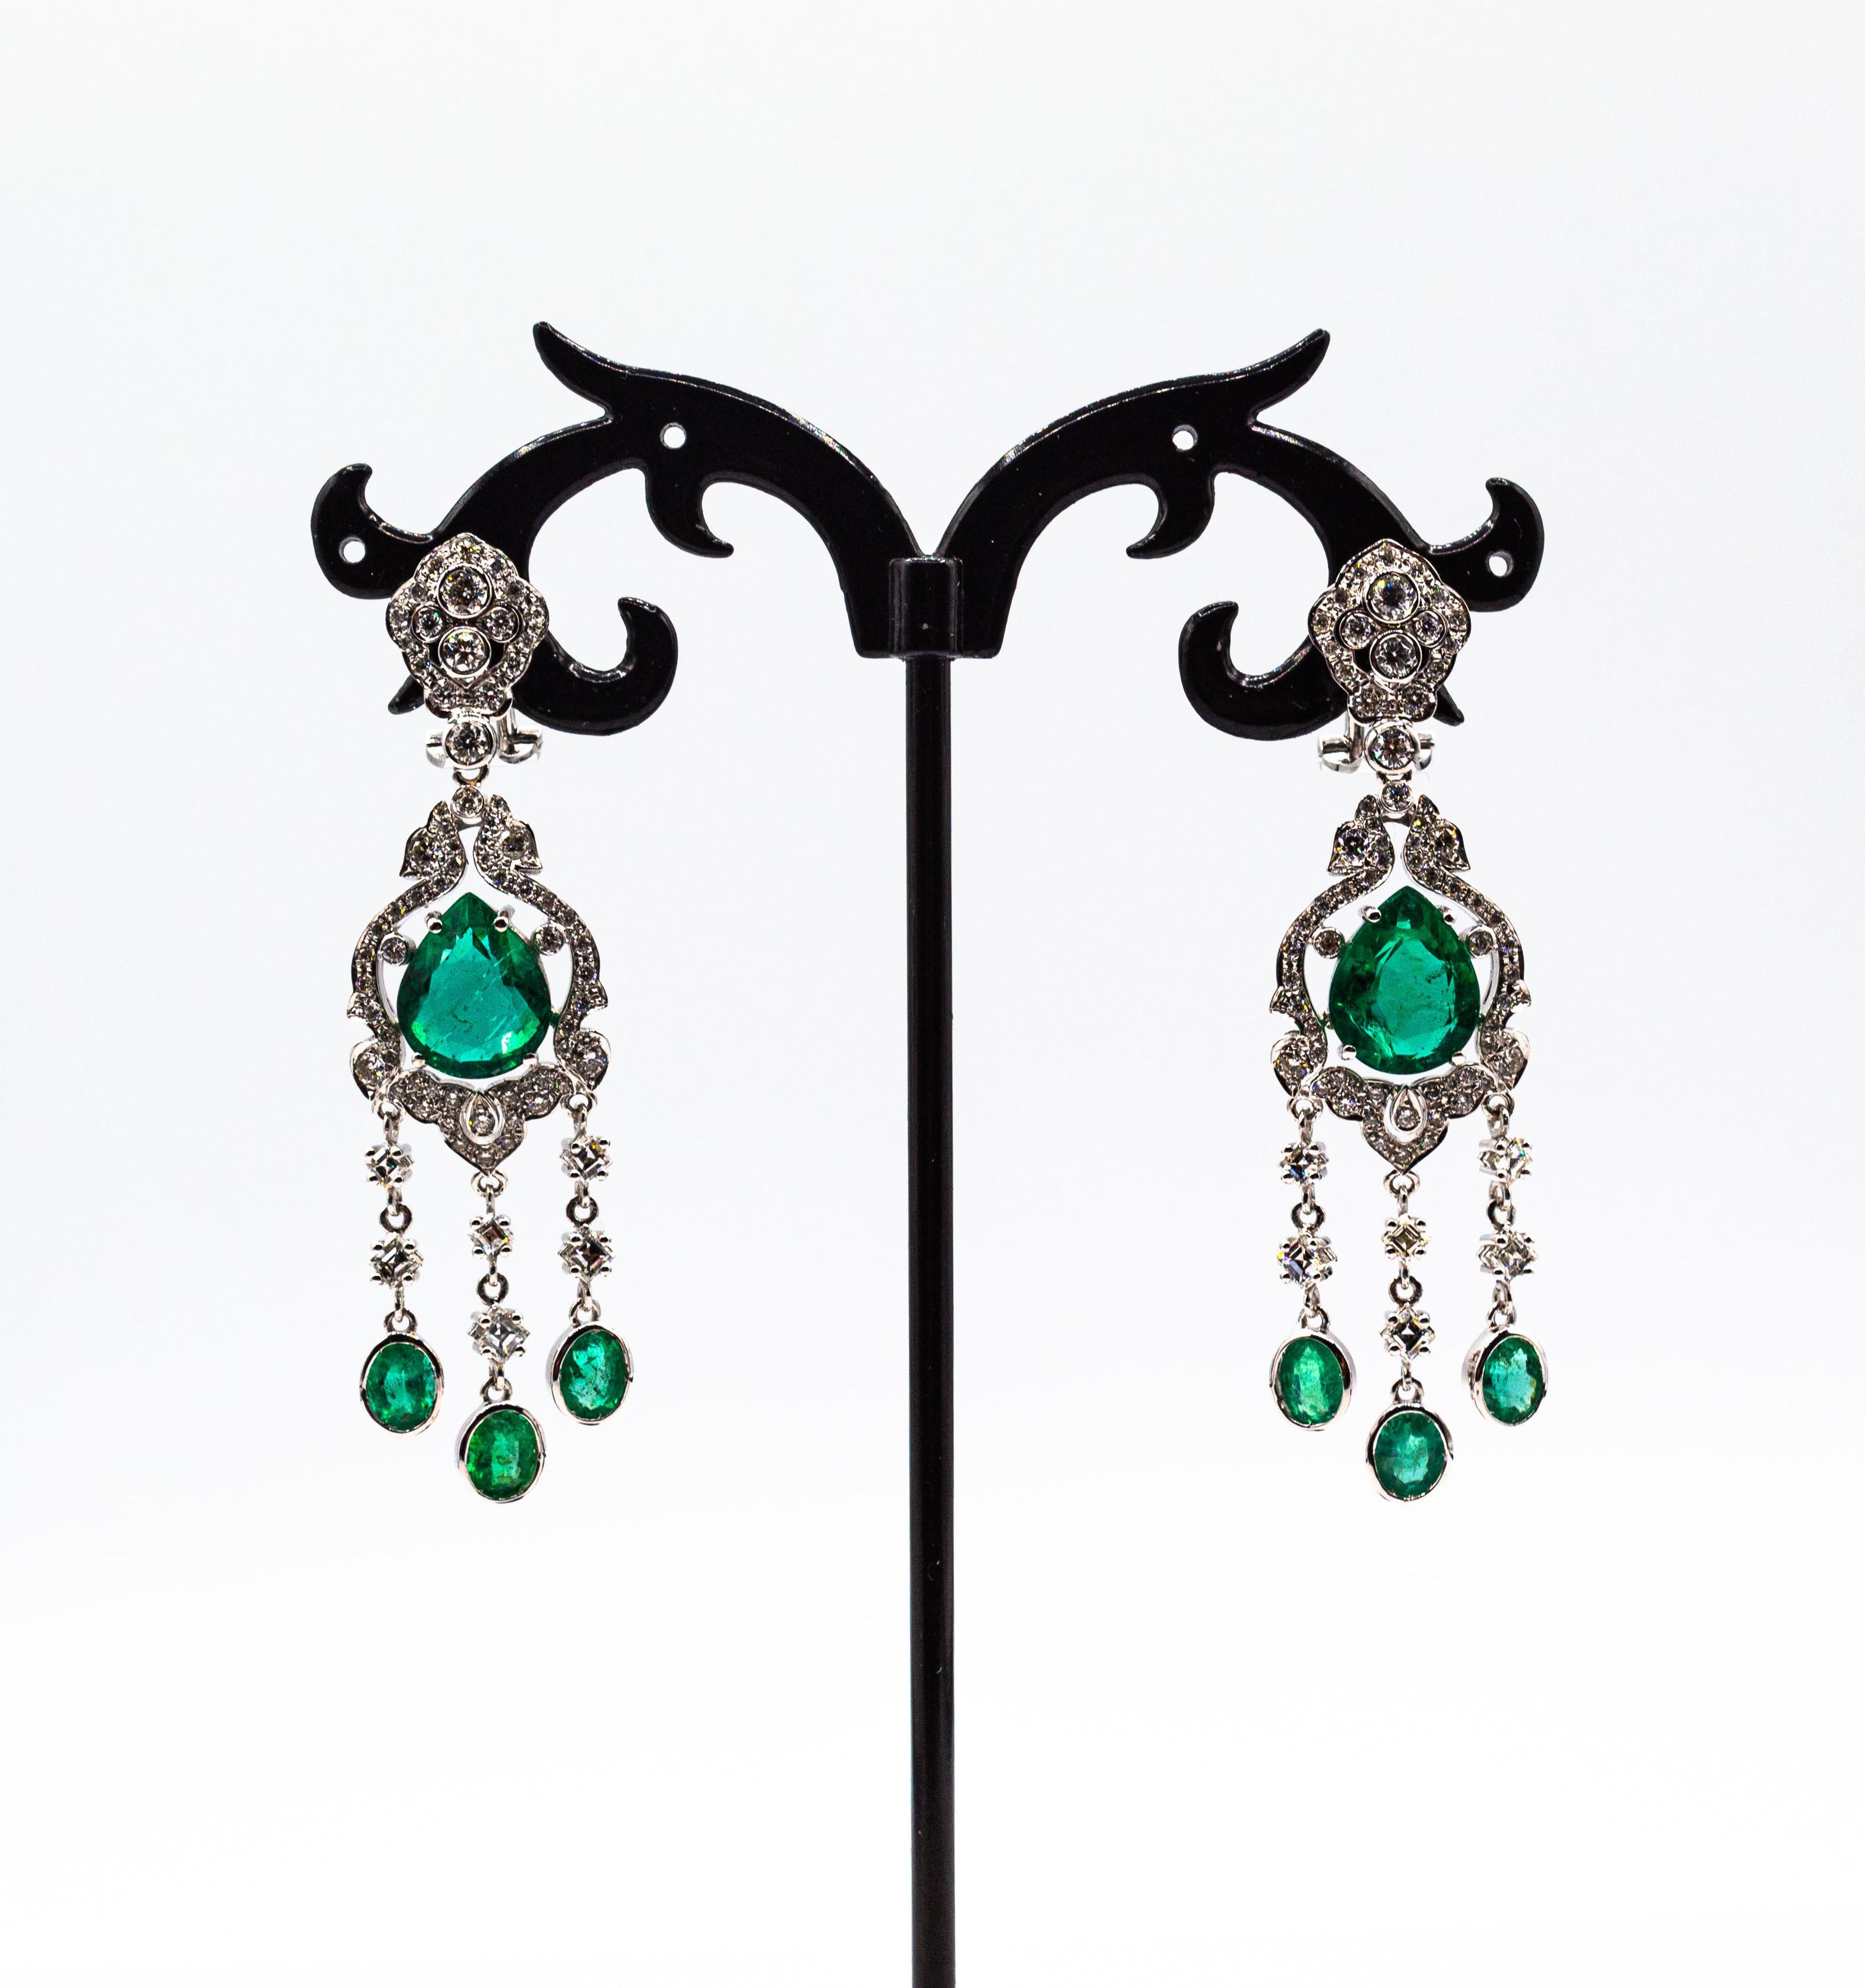 These Earrings are made of 18K White Gold.
These Earrings have 1.40 Carats of White Brilliant Cut Diamonds.
These Earrings have 0.77 Carats of White Princess Cut Diamonds.
These Earrings have 5.78 Carats of Certified Pear Cut Emeralds. (2.92ct +